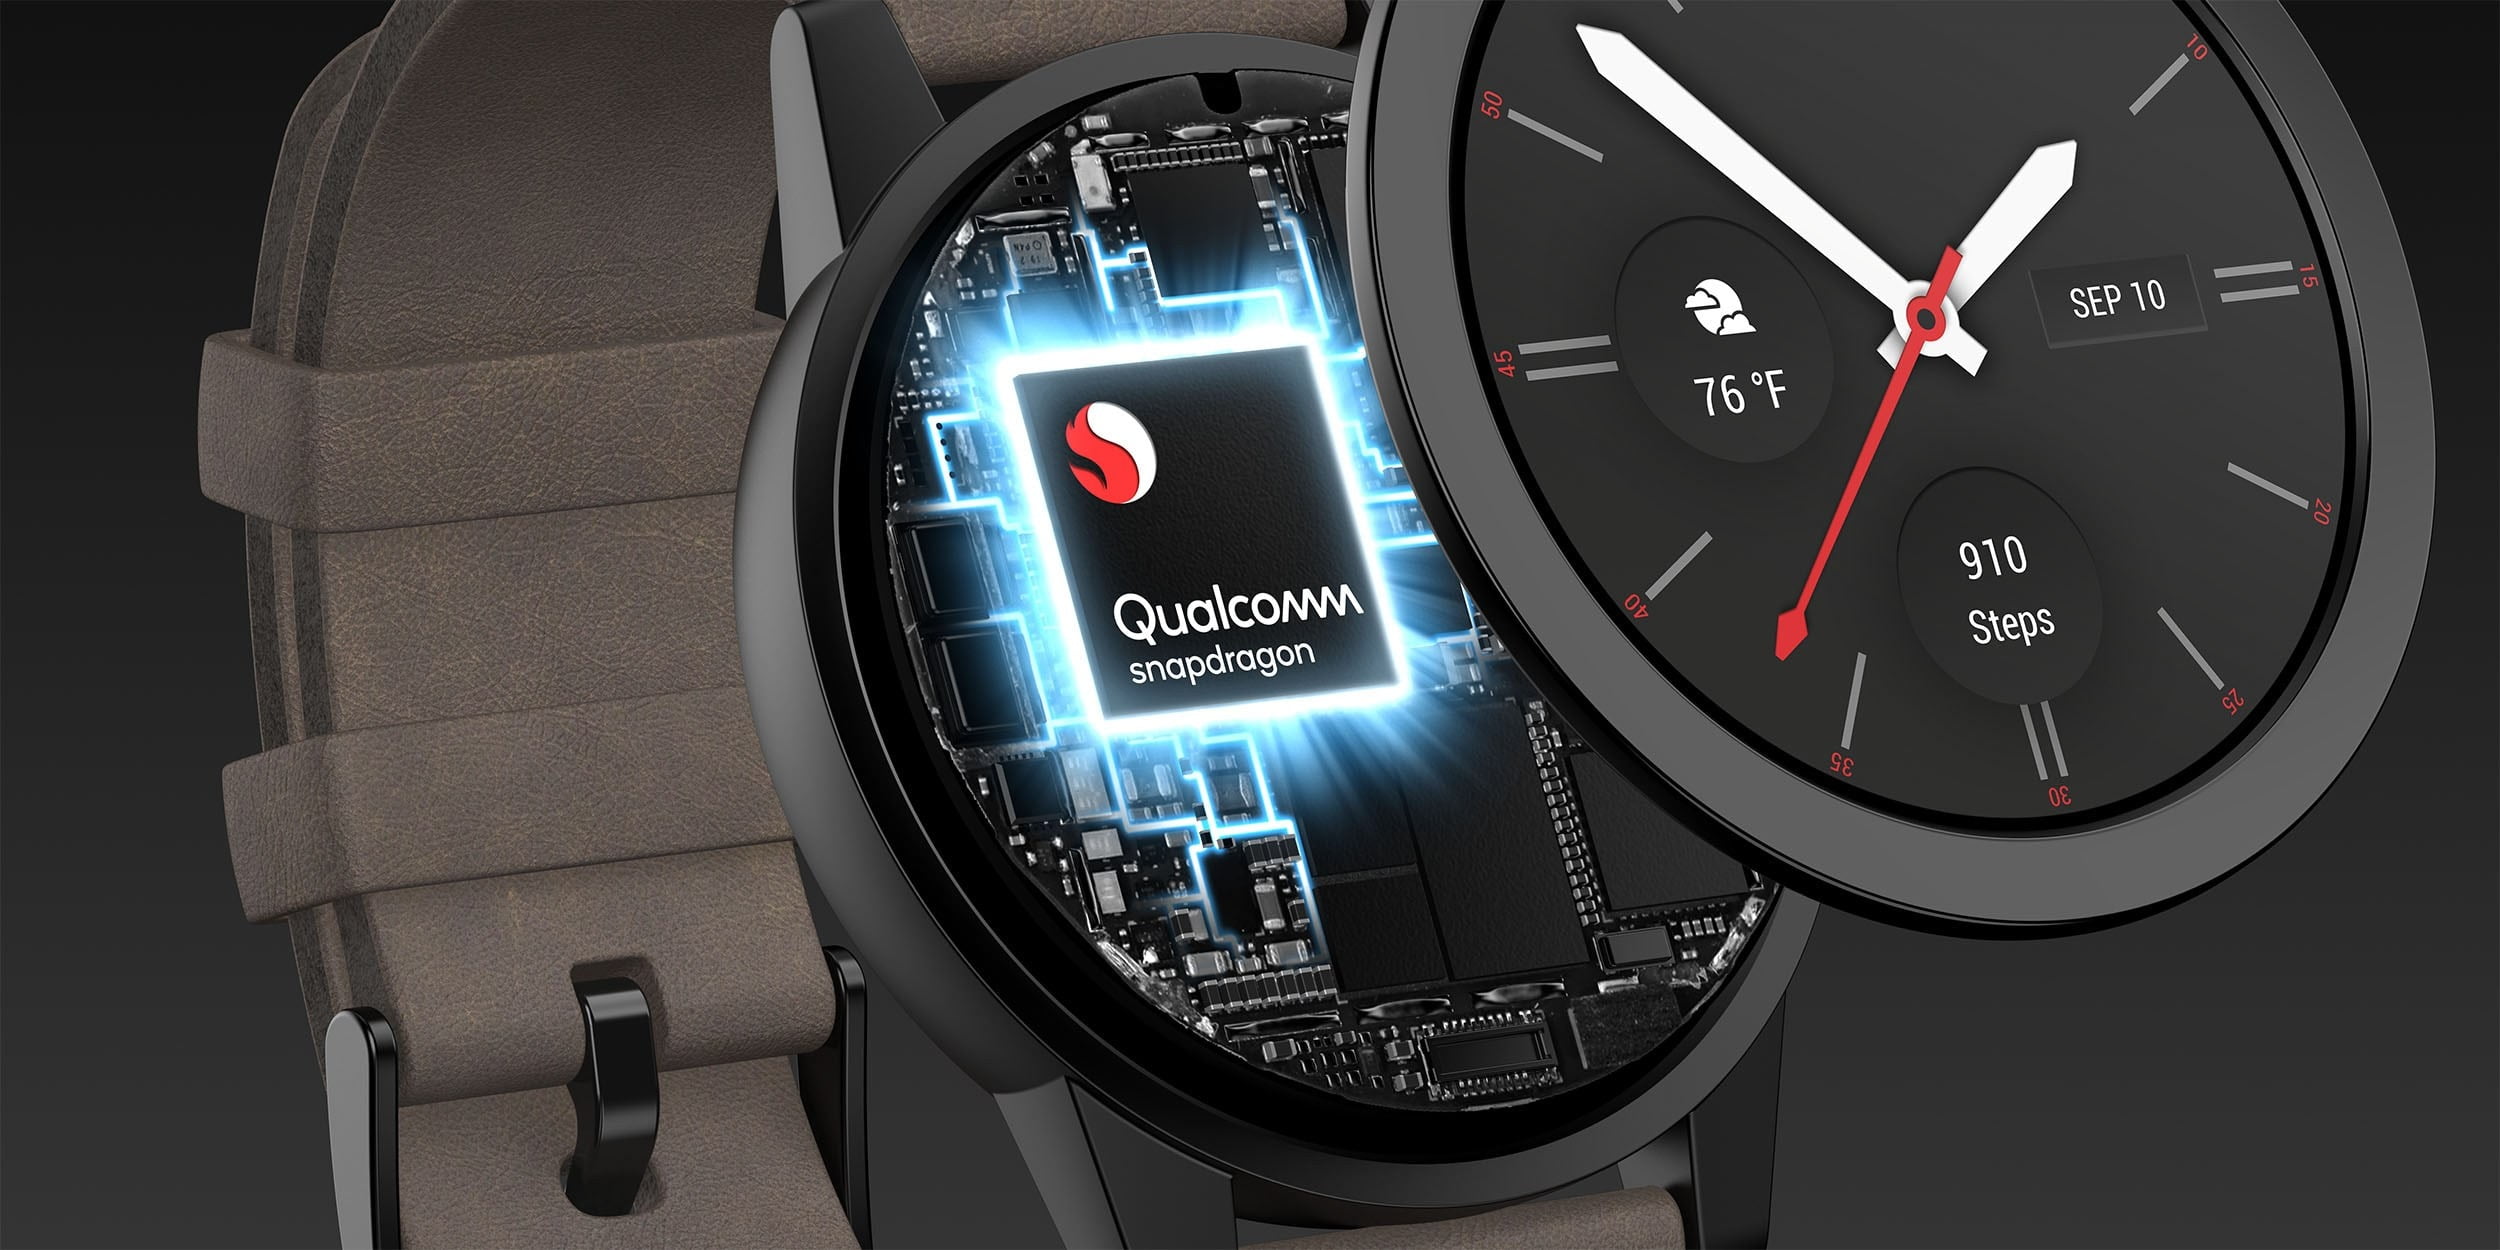 Qualcomm Snapdragon Wear 5100 vs Snapdragon Wear 4100 vs Samsung Exynos W920 Specifications Compared – Leaks suggest another disappointing chipset